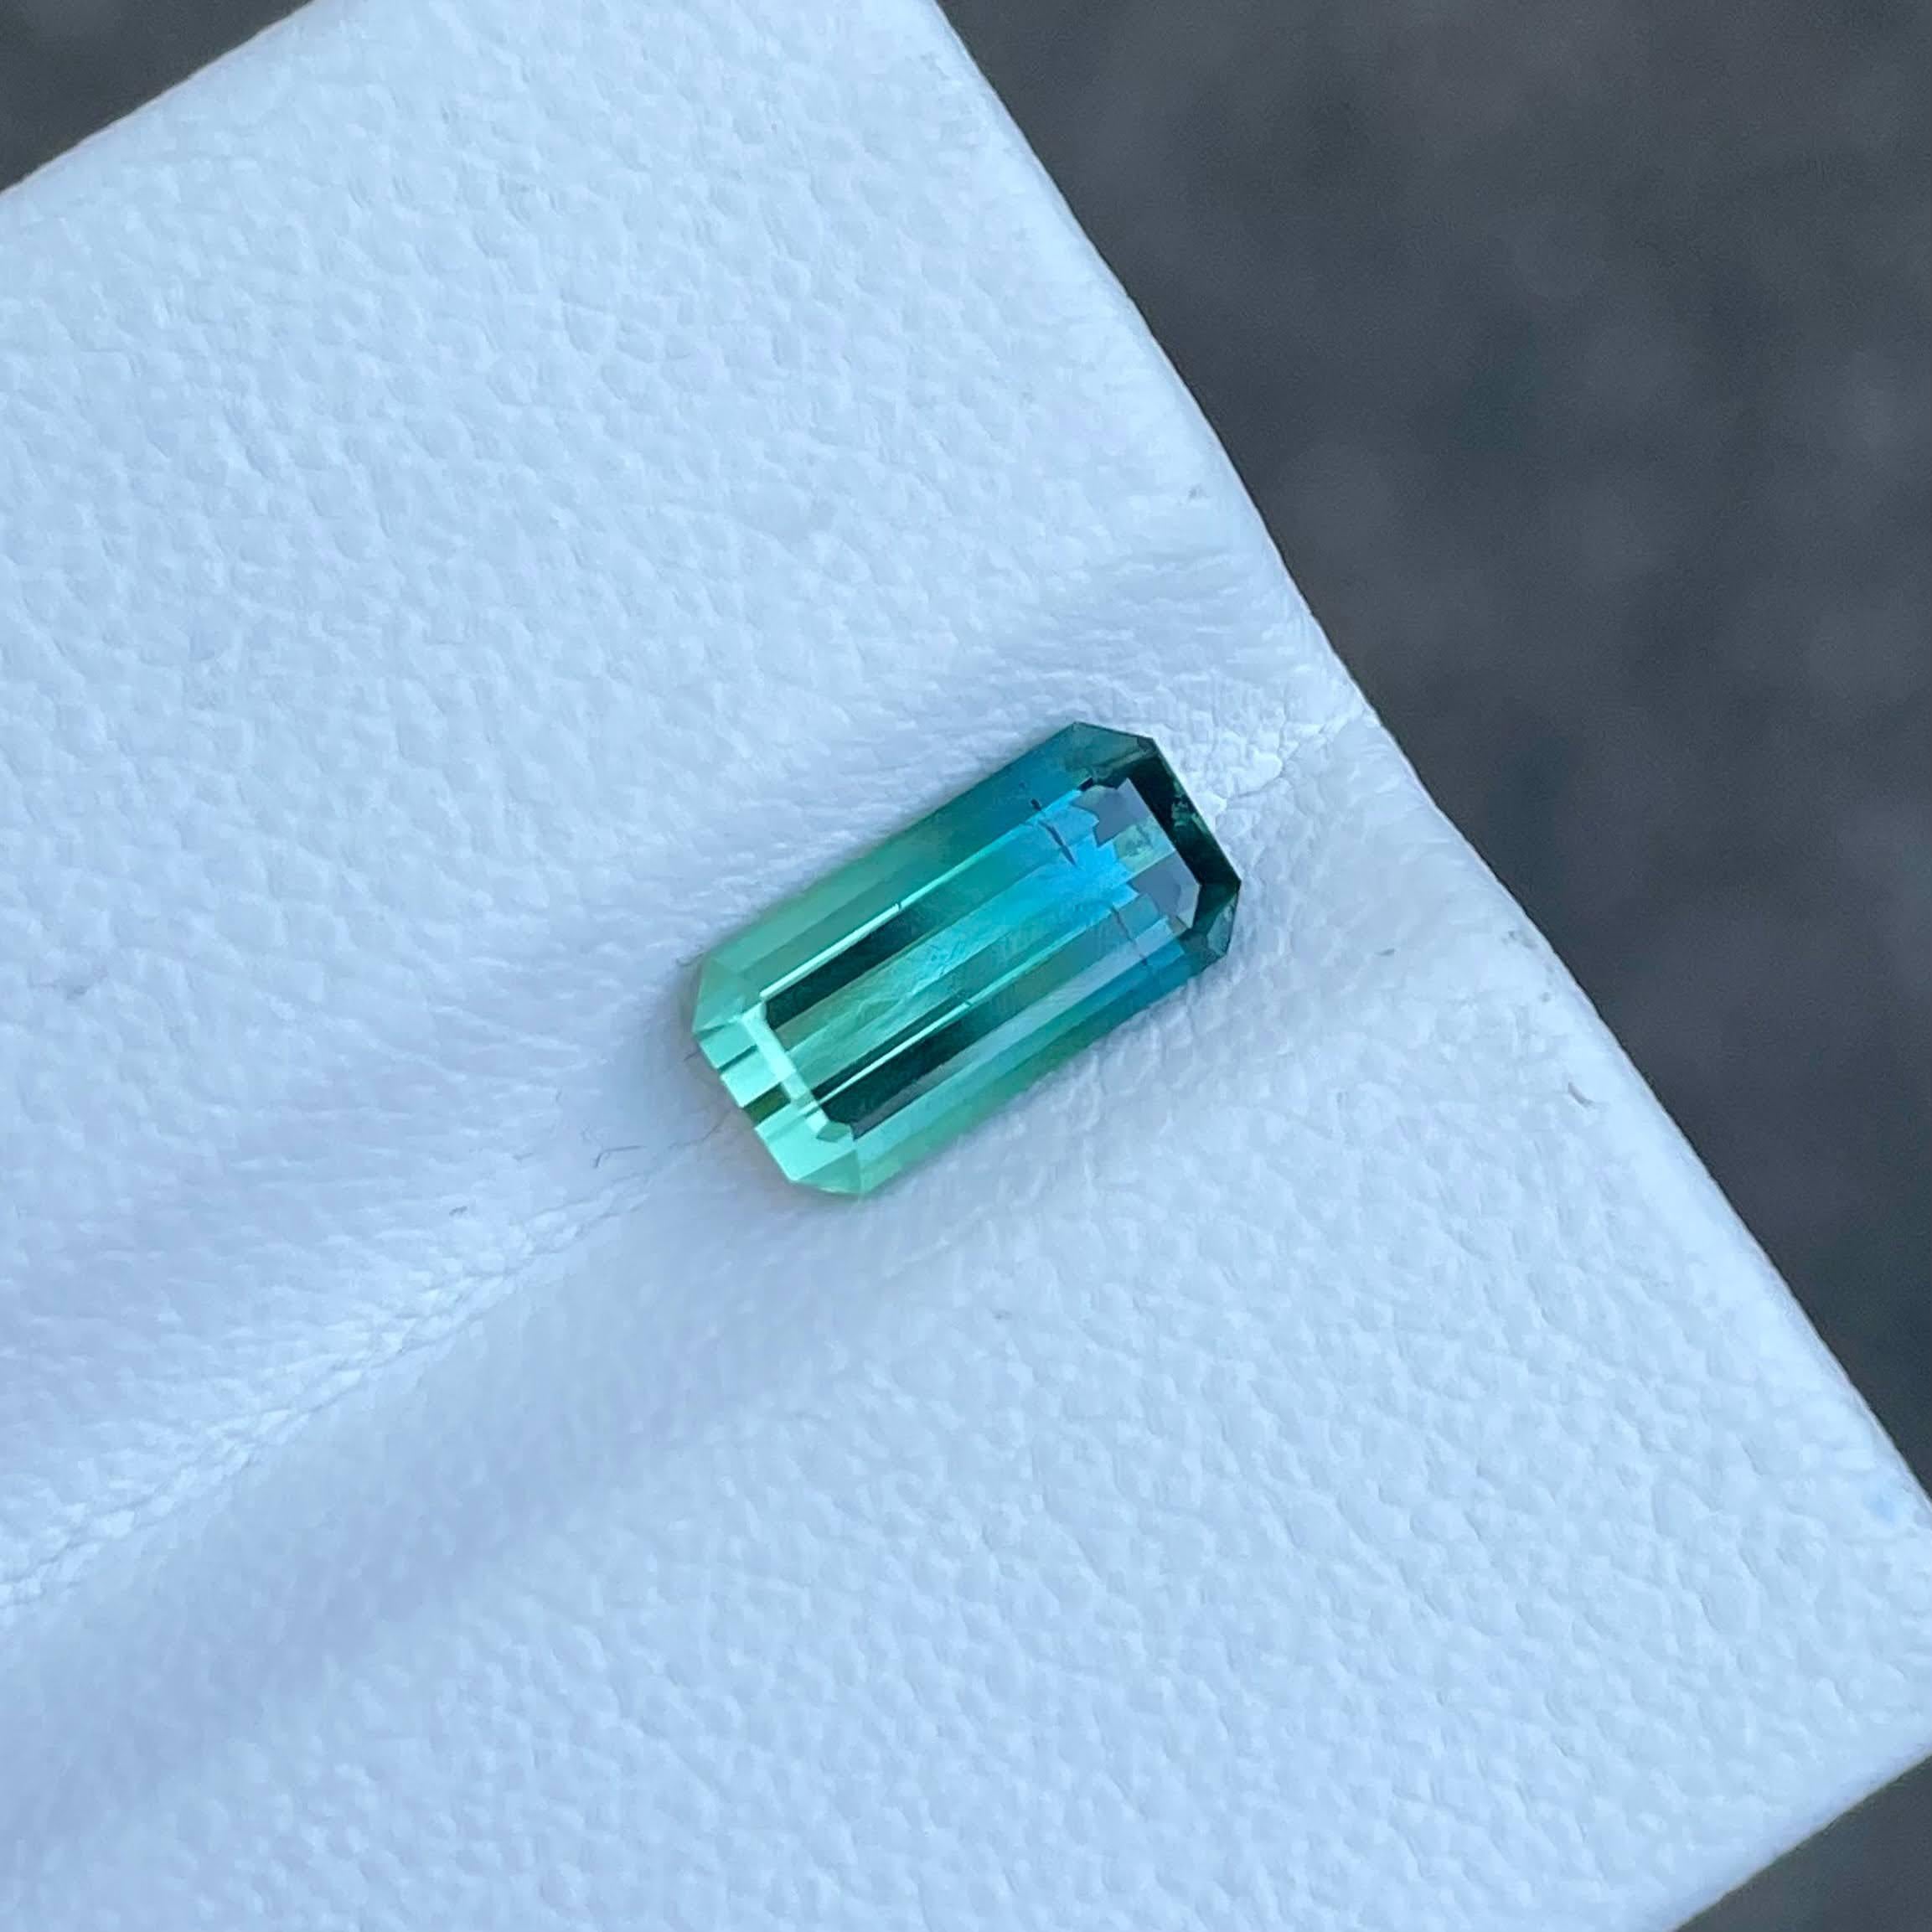 Weight 1.75 carats 
Dimensions 9.9x5.1x3.9 mm
Origin Afghanistan
Clarity VVS
Treatment None
Shape rectangular
Cut Emerald Step Cut




The Bi-Color Tourmaline, a captivating gemstone weighing 1.75 carats, is a true marvel hailing from the rich mines